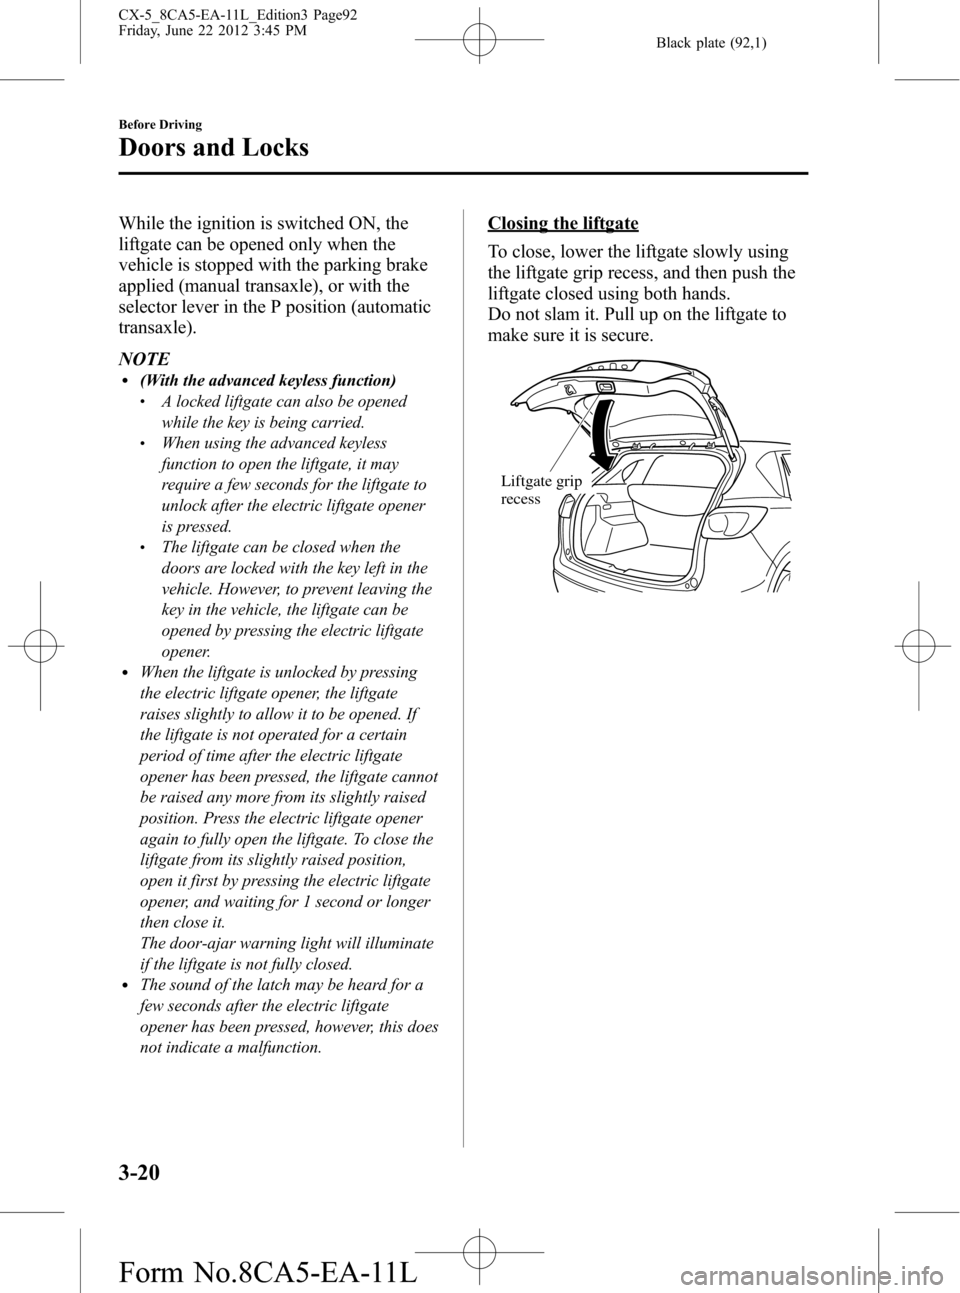 MAZDA MODEL CX-5 2013  Owners Manual (in English) Black plate (92,1)
While the ignition is switched ON, the
liftgate can be opened only when the
vehicle is stopped with the parking brake
applied (manual transaxle), or with the
selector lever in the P